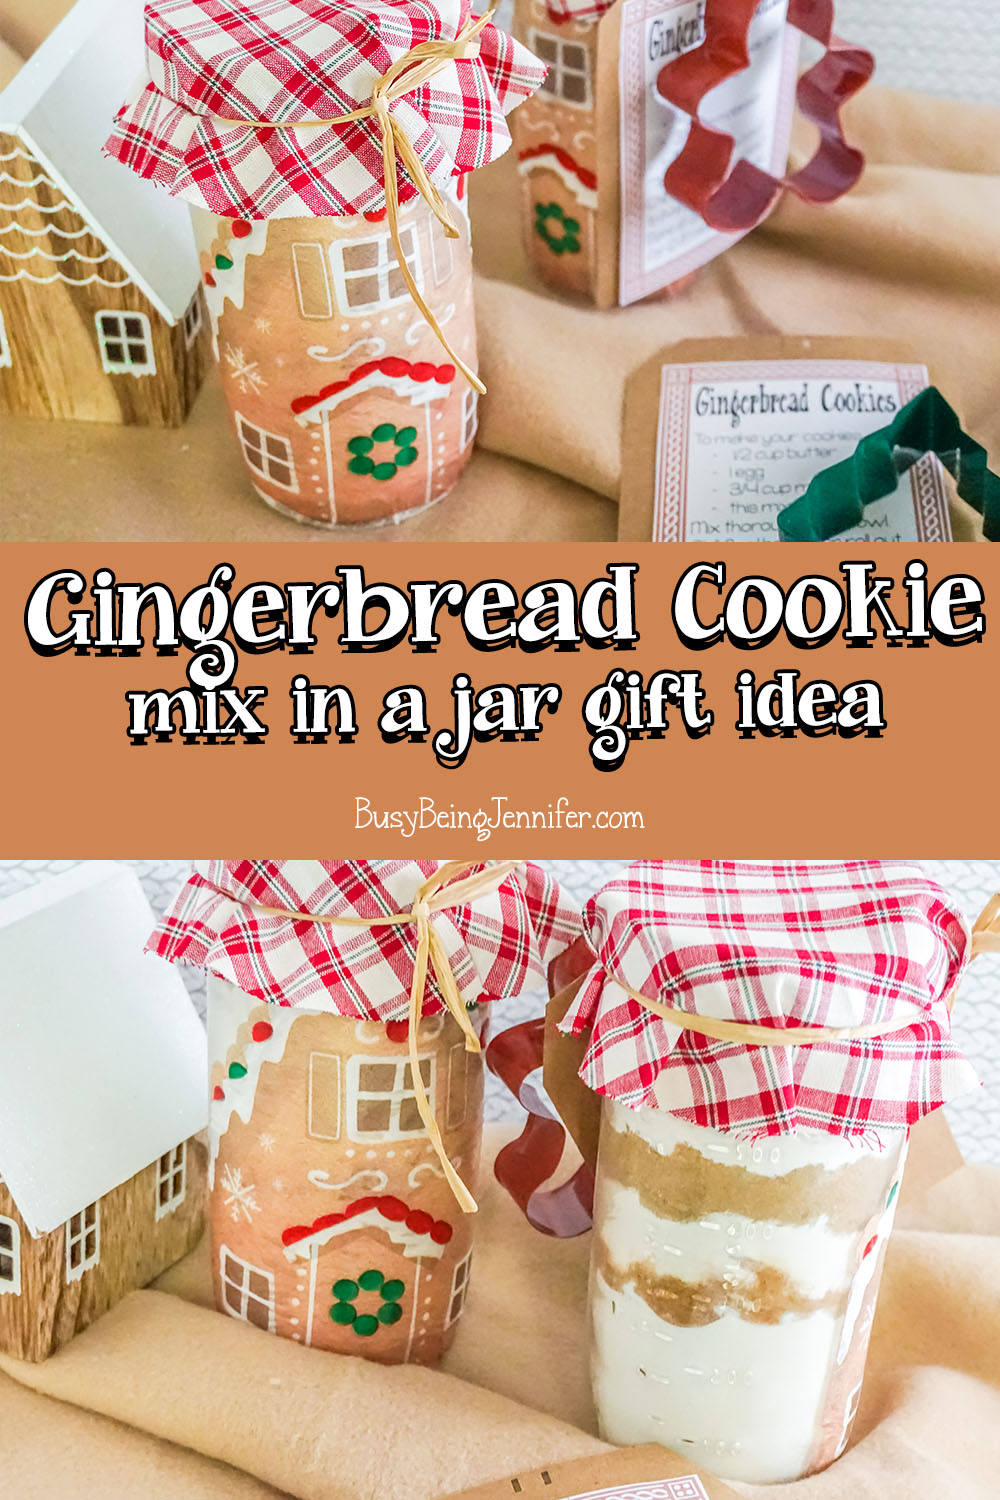 This Gingerbread House Mason Jar Cookie Mix in a Jar Gift is PERFECT for bringing a feeling of family and home to your gift recipients.